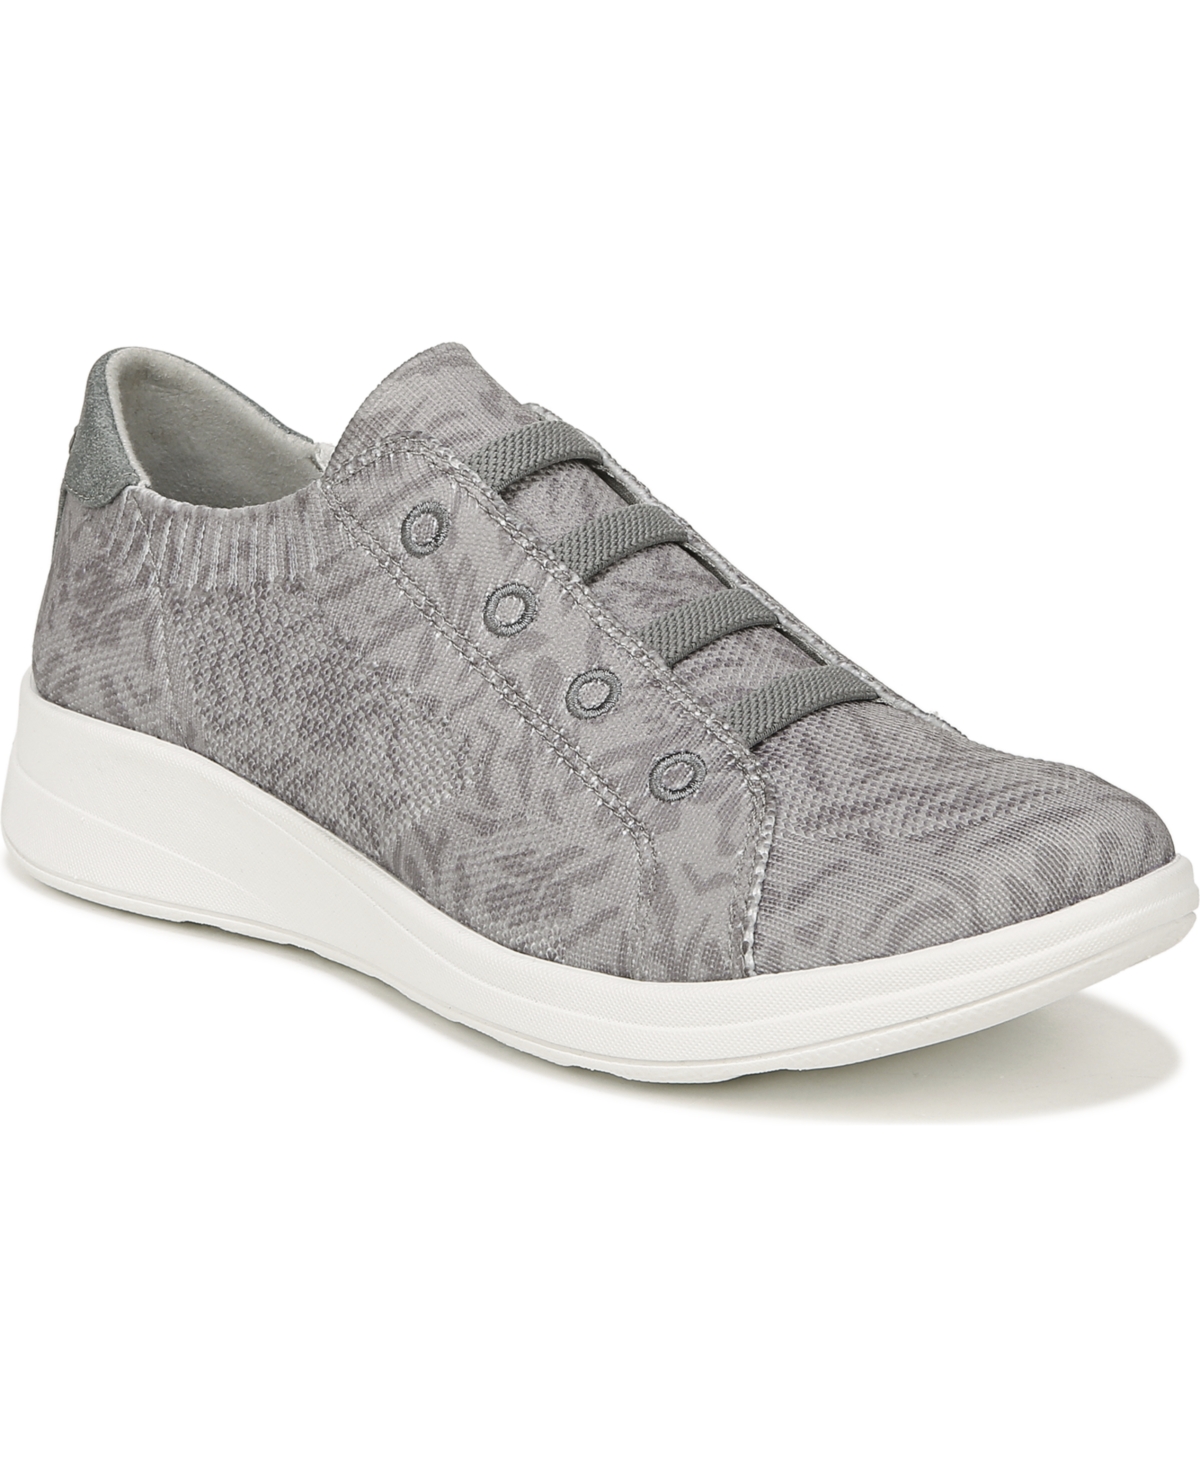 Bzees Premium Golden Knit Washable Slip-on Sneakers In Grey Knit Fabric